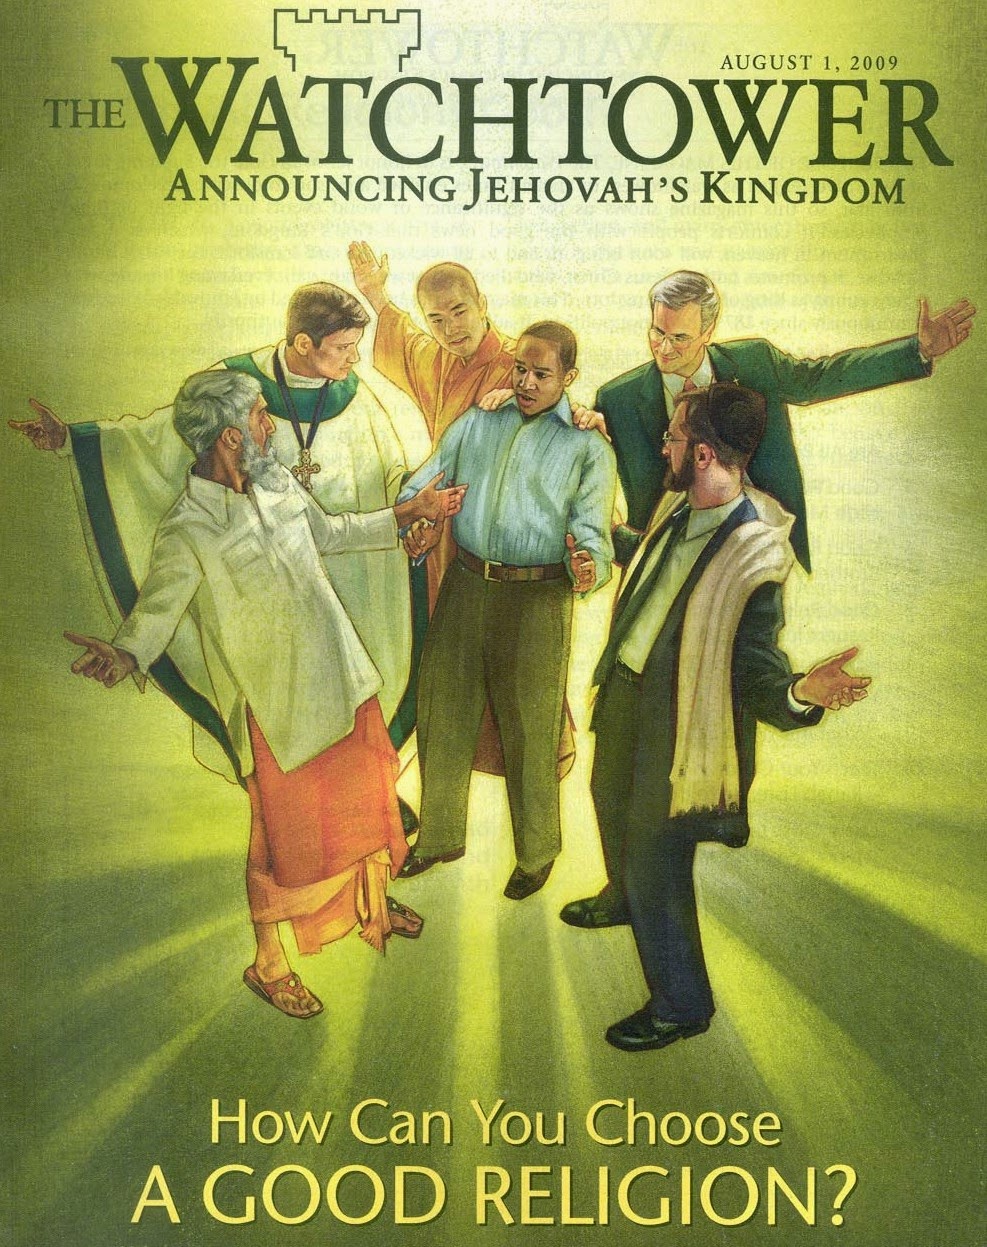 Witnessing to Jehovah's Witness: The Watchtower organization